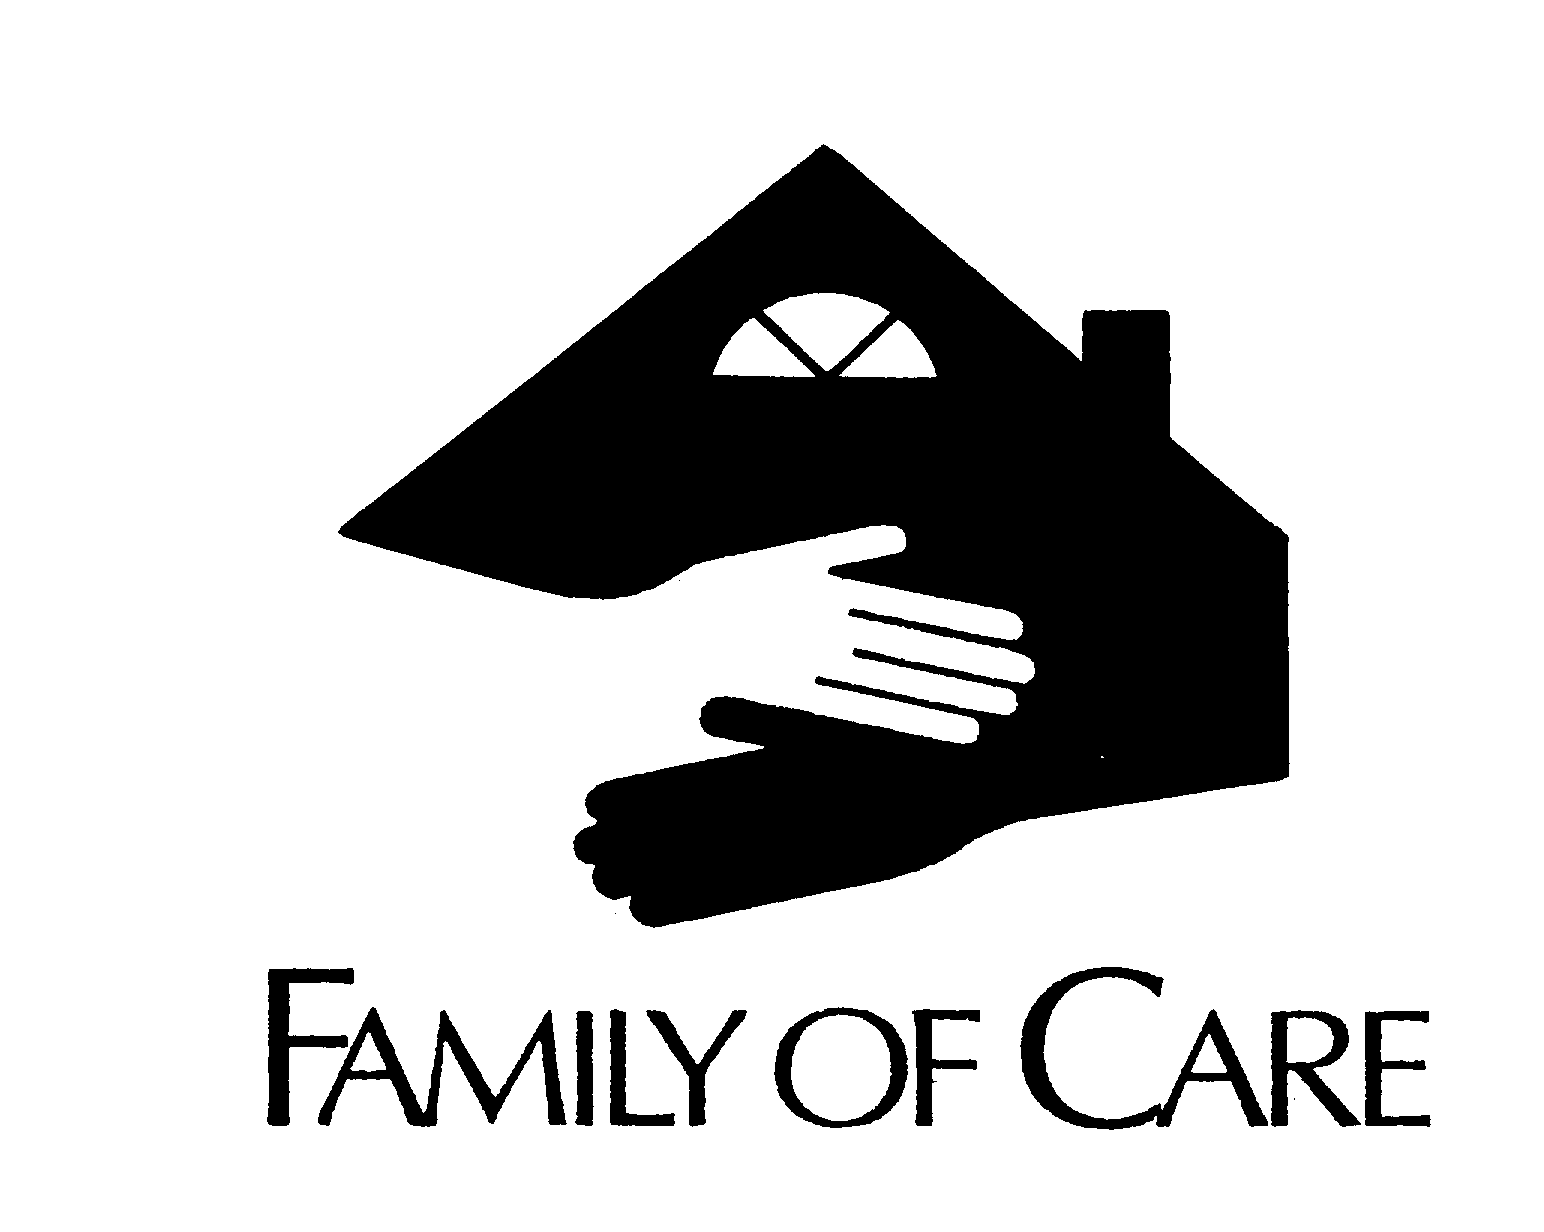  FAMILY OF CARE